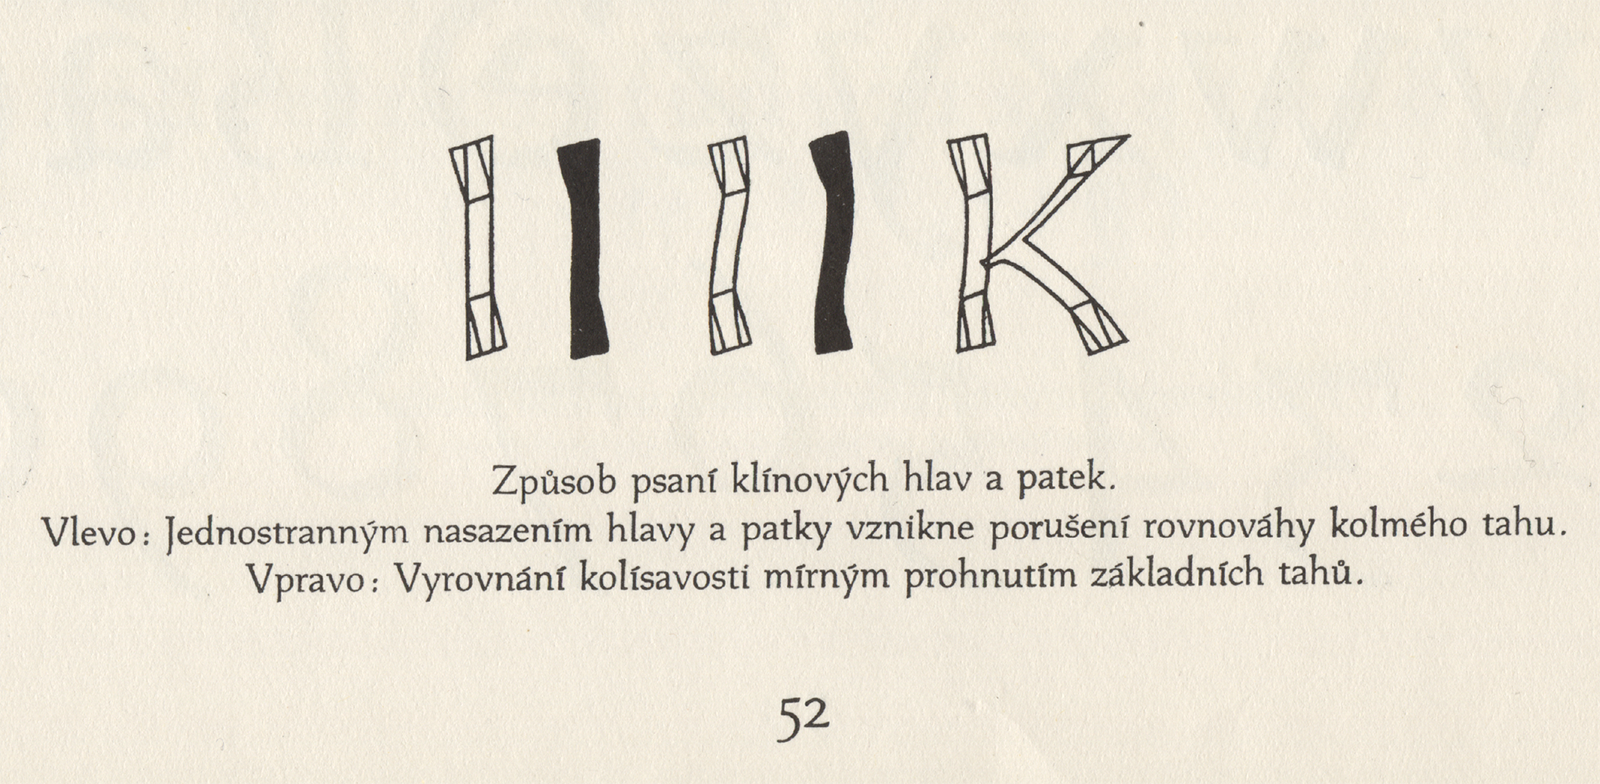 Method of drawing wedge head serifs. Left: The unilateral use of the heads and serifs creates a violation of the balance of the perpendicular strokes. Right: Smoothing out the unsteadiness by slightly bending the basic curves. A sample of O. Menhart’s publication; Nauka o písmu [Teachings on Type], State Pedagogical Publishing House, Prague 1954.